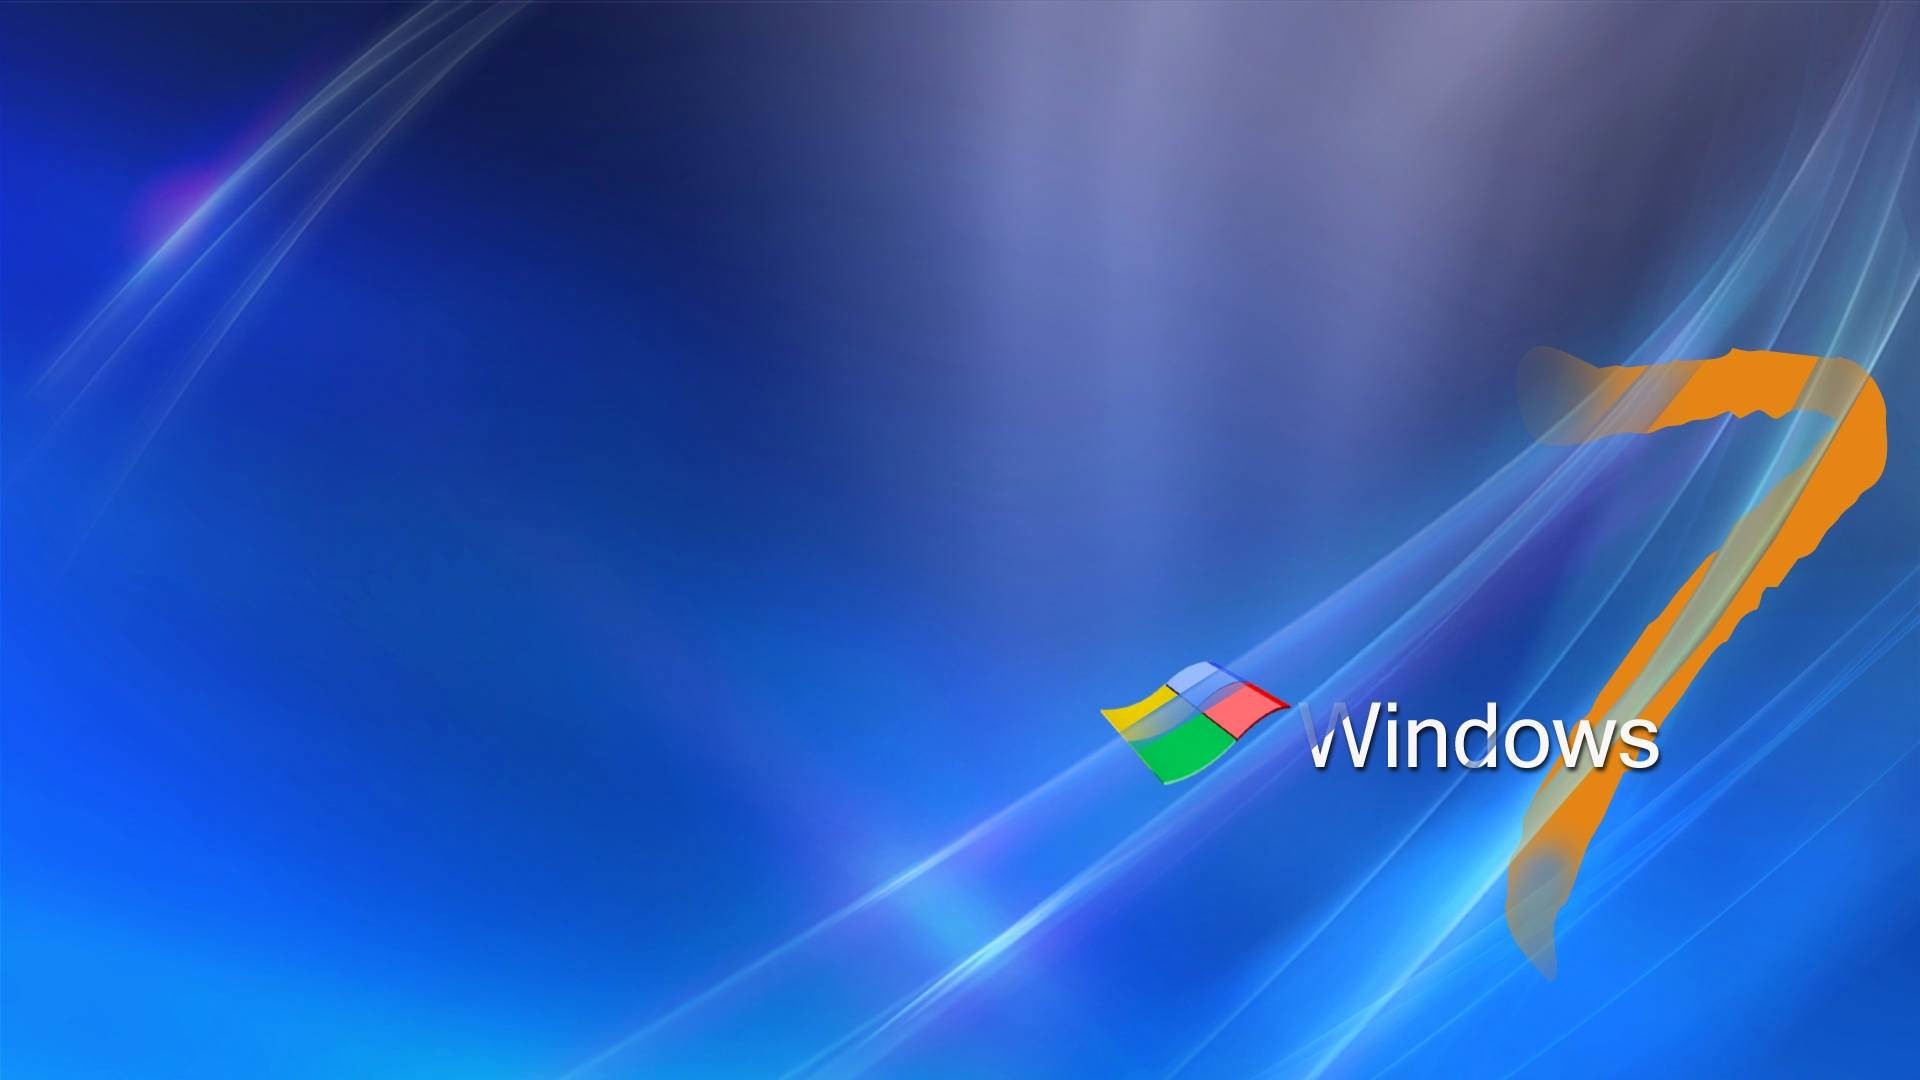 1920x1080 Windows 7 HD Wallpapers Download (High Definition) - Mytechshout .